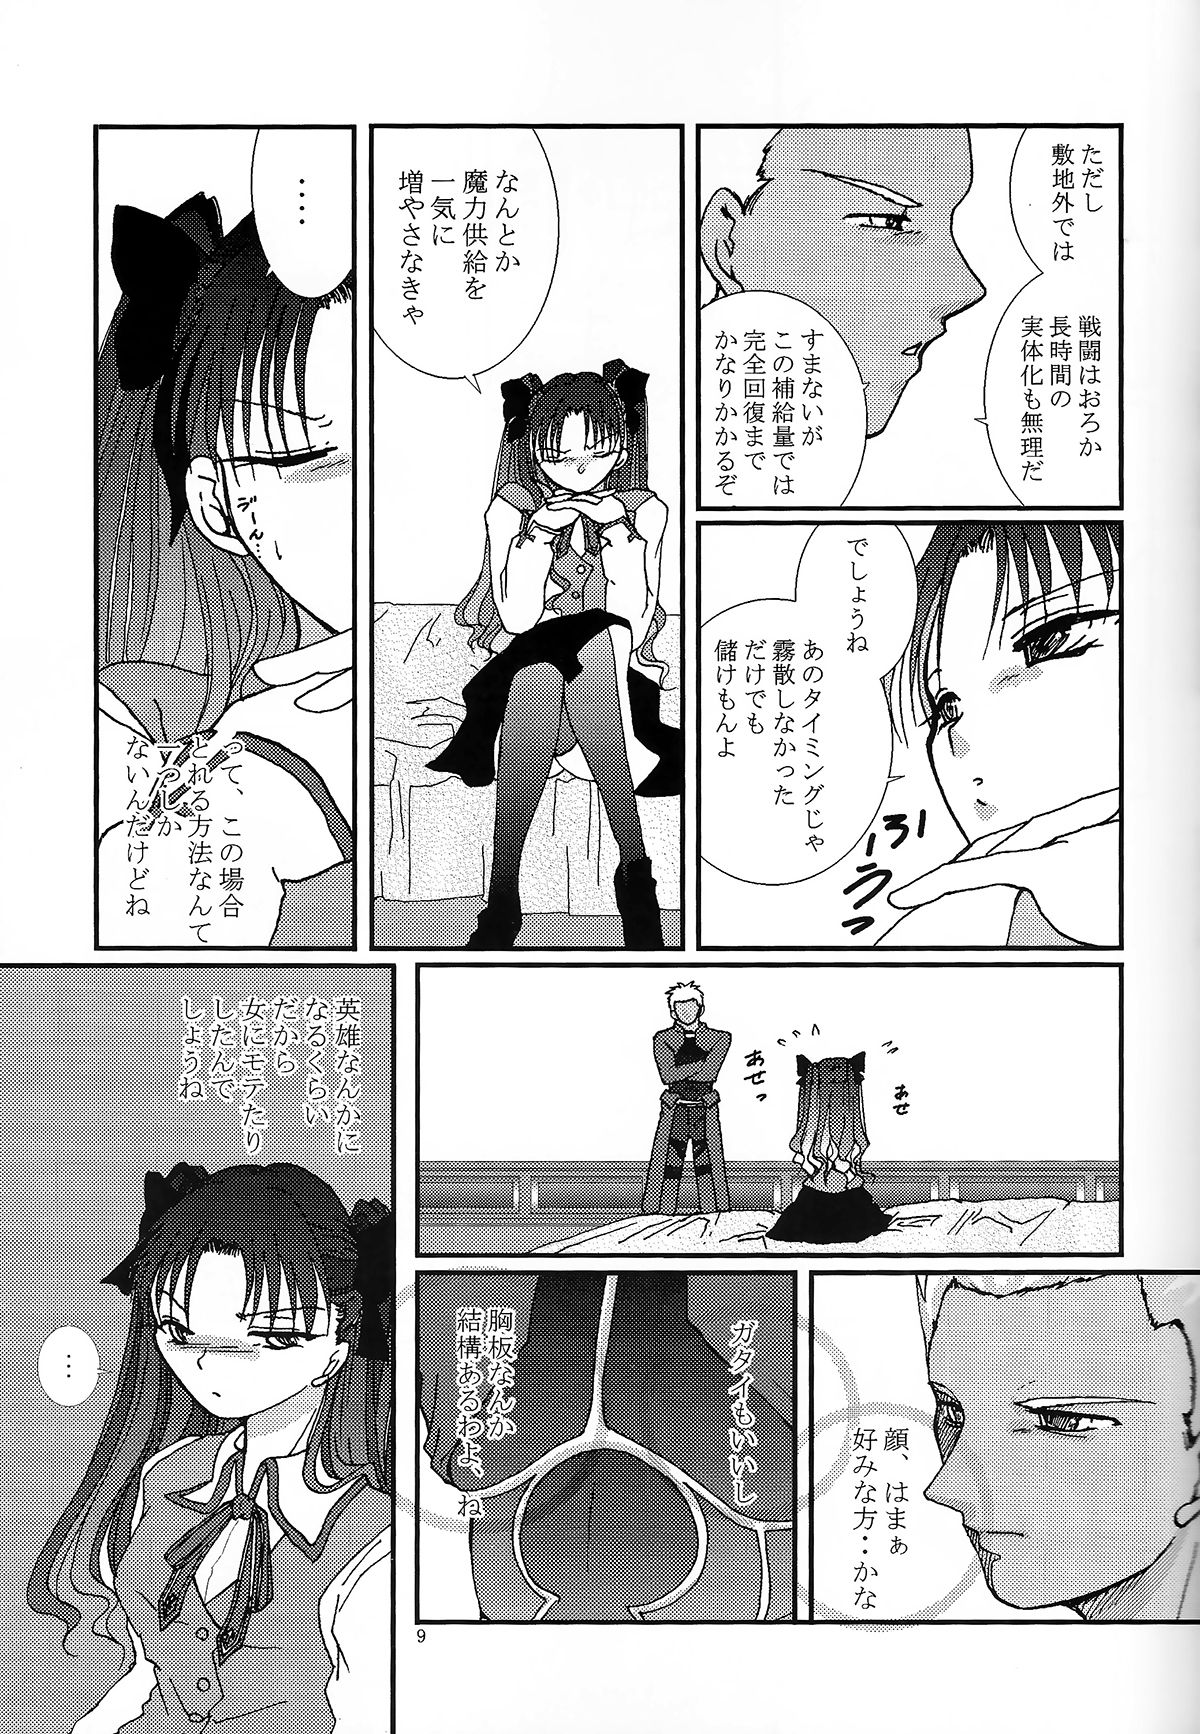 (SC24) [Takeda Syouten (Takeda Sora)] Question-7 (Fate/stay night) page 7 full